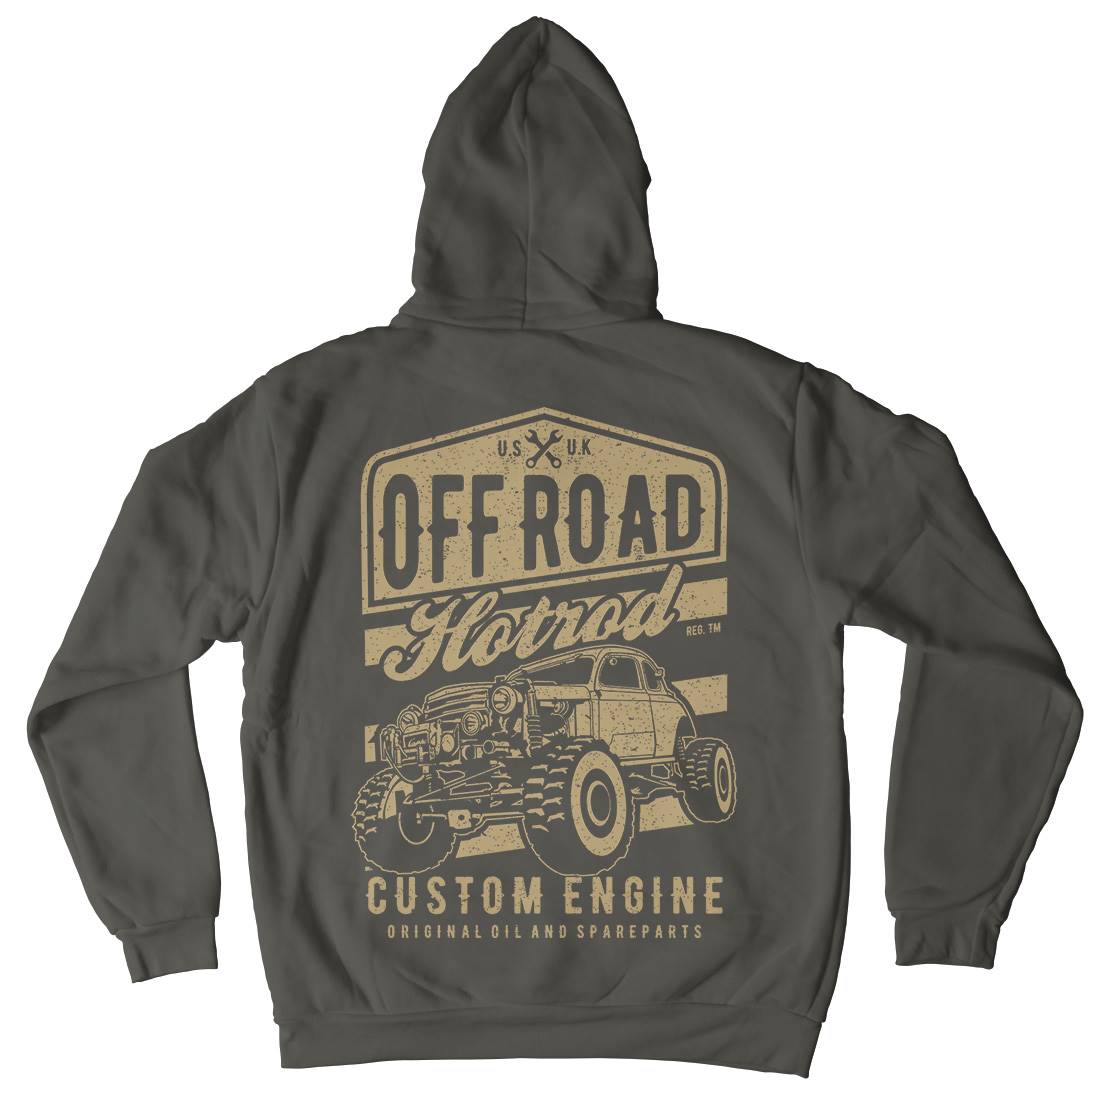 Offroad Hotrod Kids Crew Neck Hoodie Cars A730